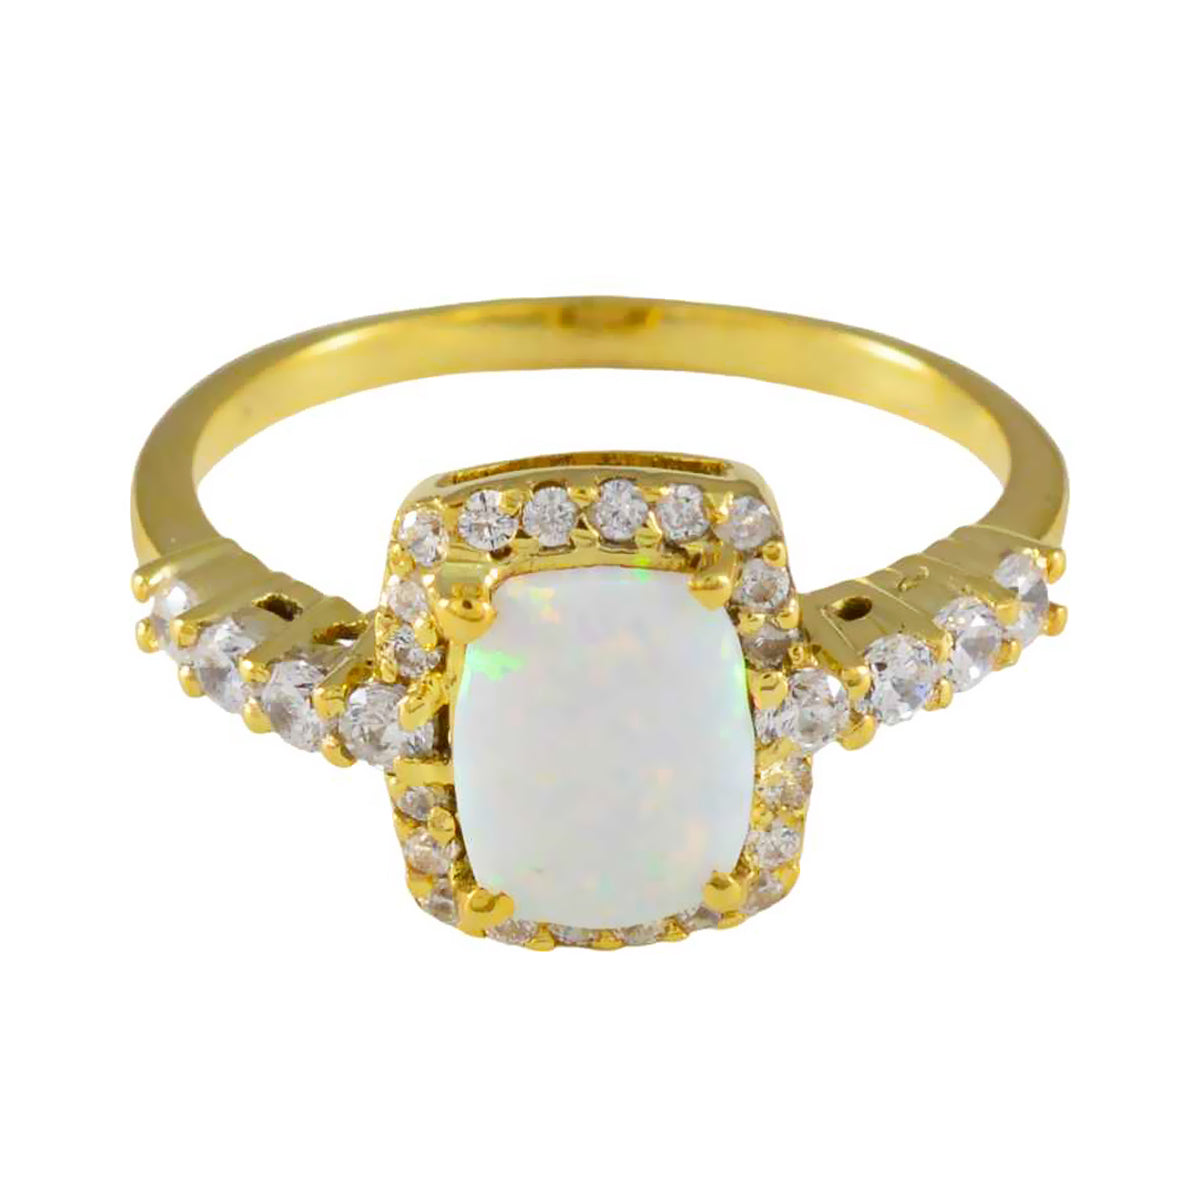 Riyo Prime Silver Ring With Yellow Gold Plating Opal CZ Stone Octagon Shape Prong Setting Antique Jewelry Birthday Ring